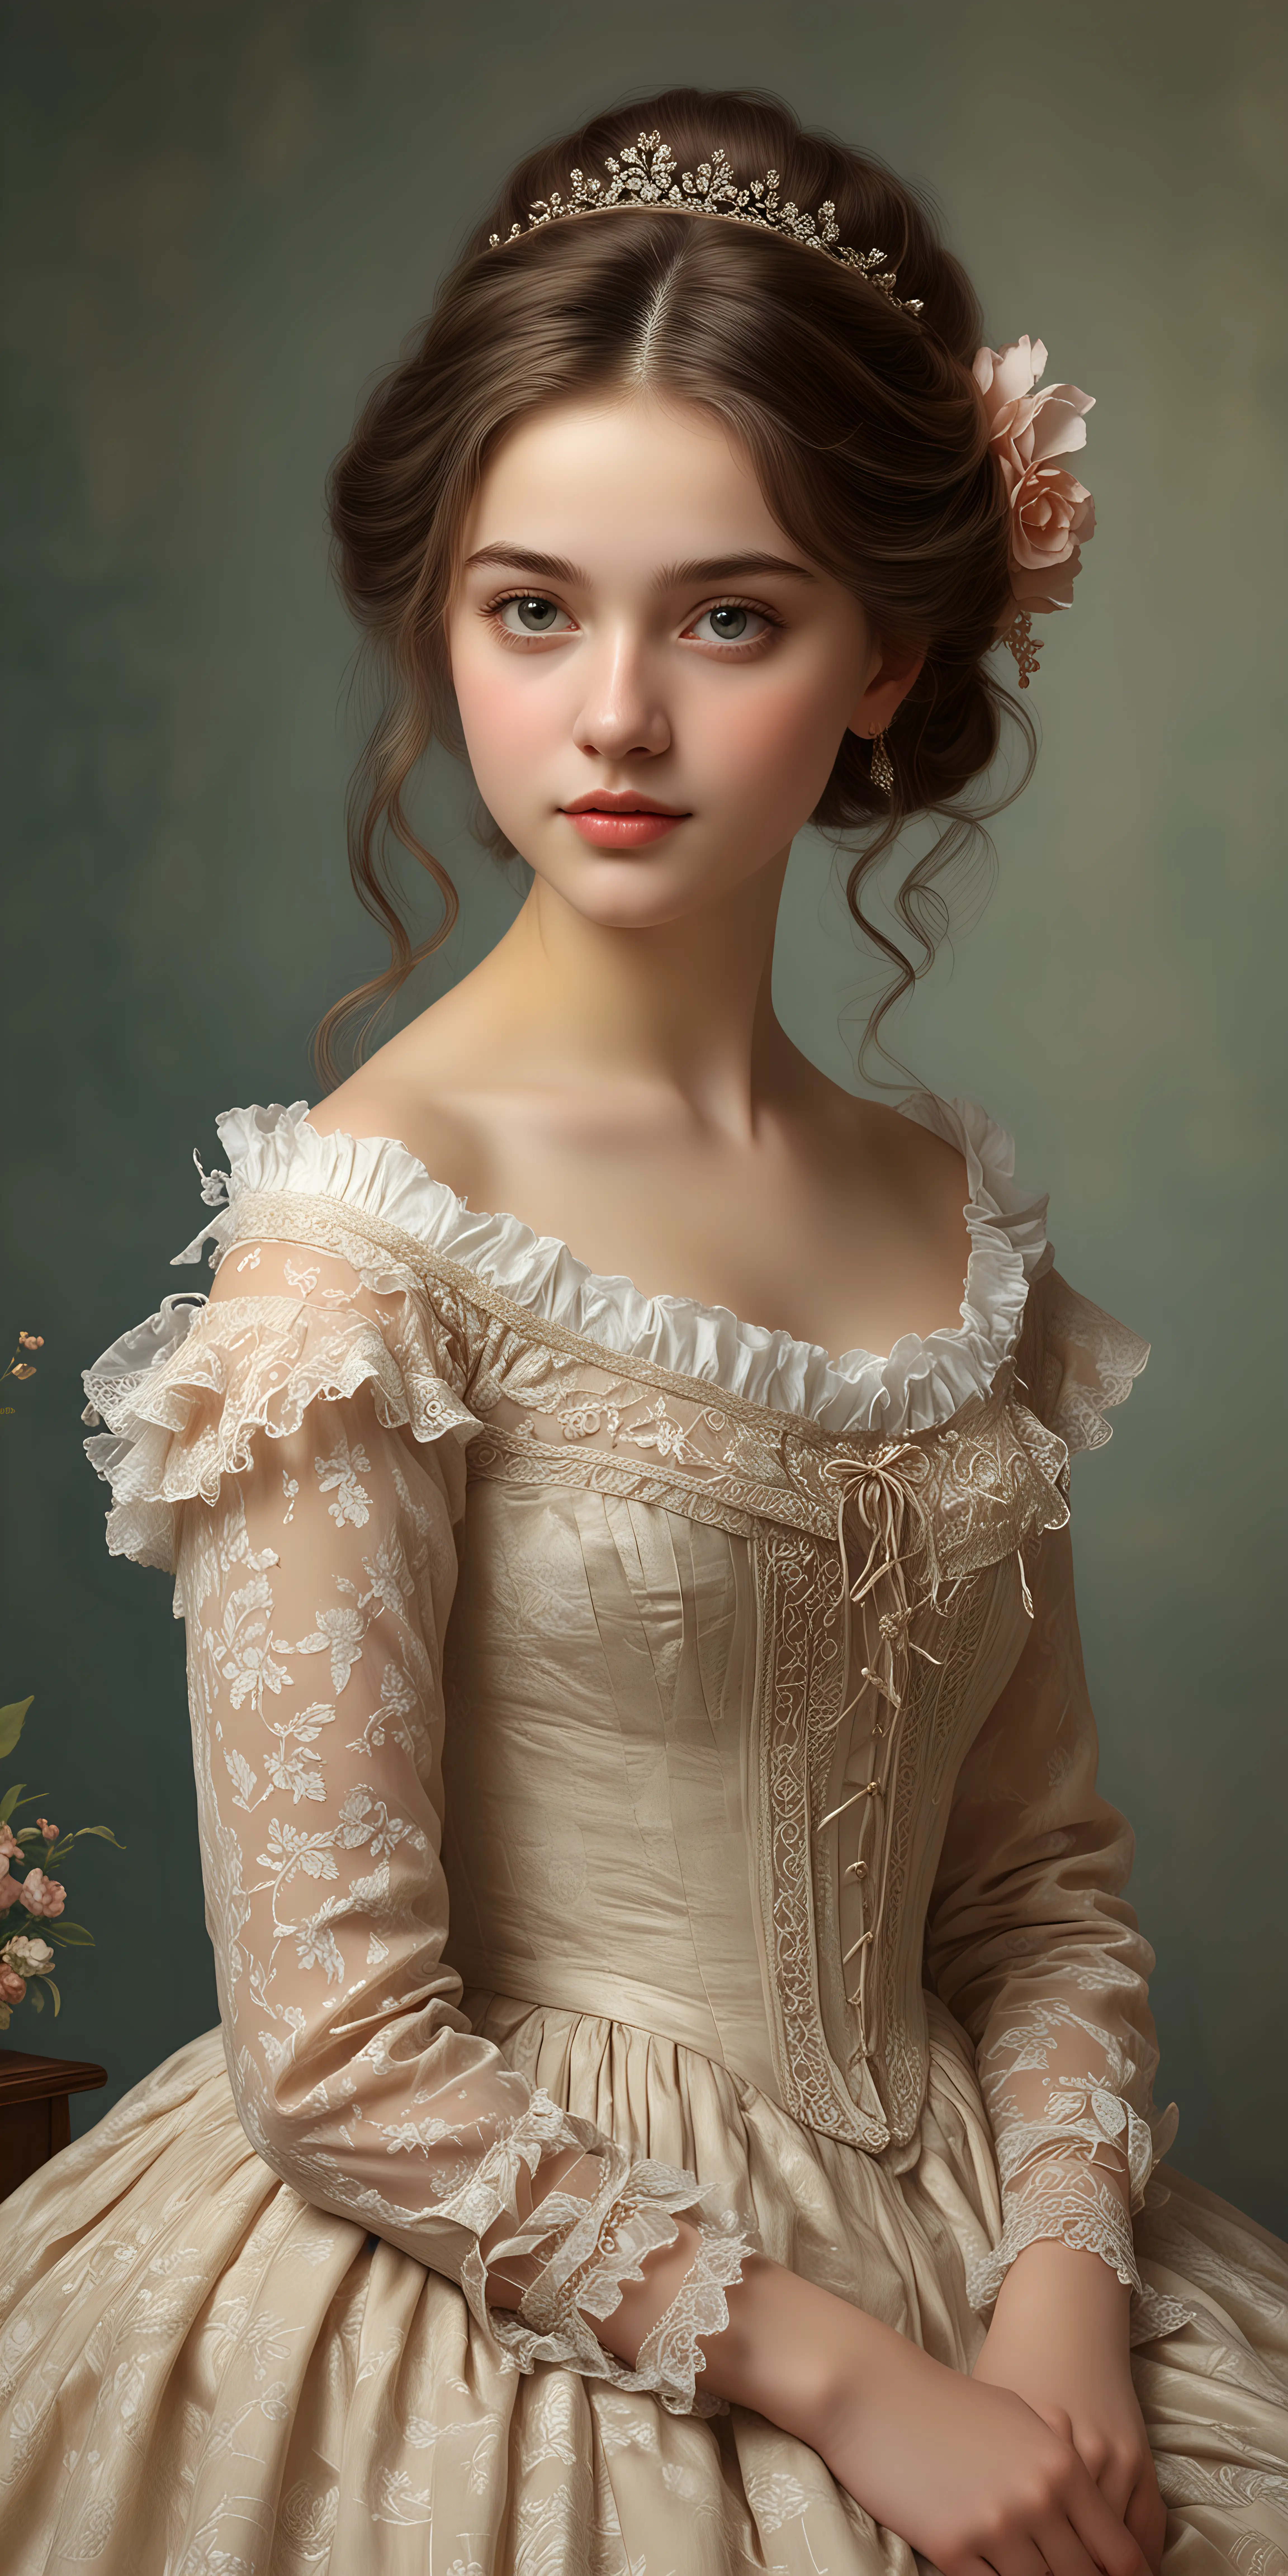 Timeless Elegance Enchanting Portrait of a Girl in 19th Century Style